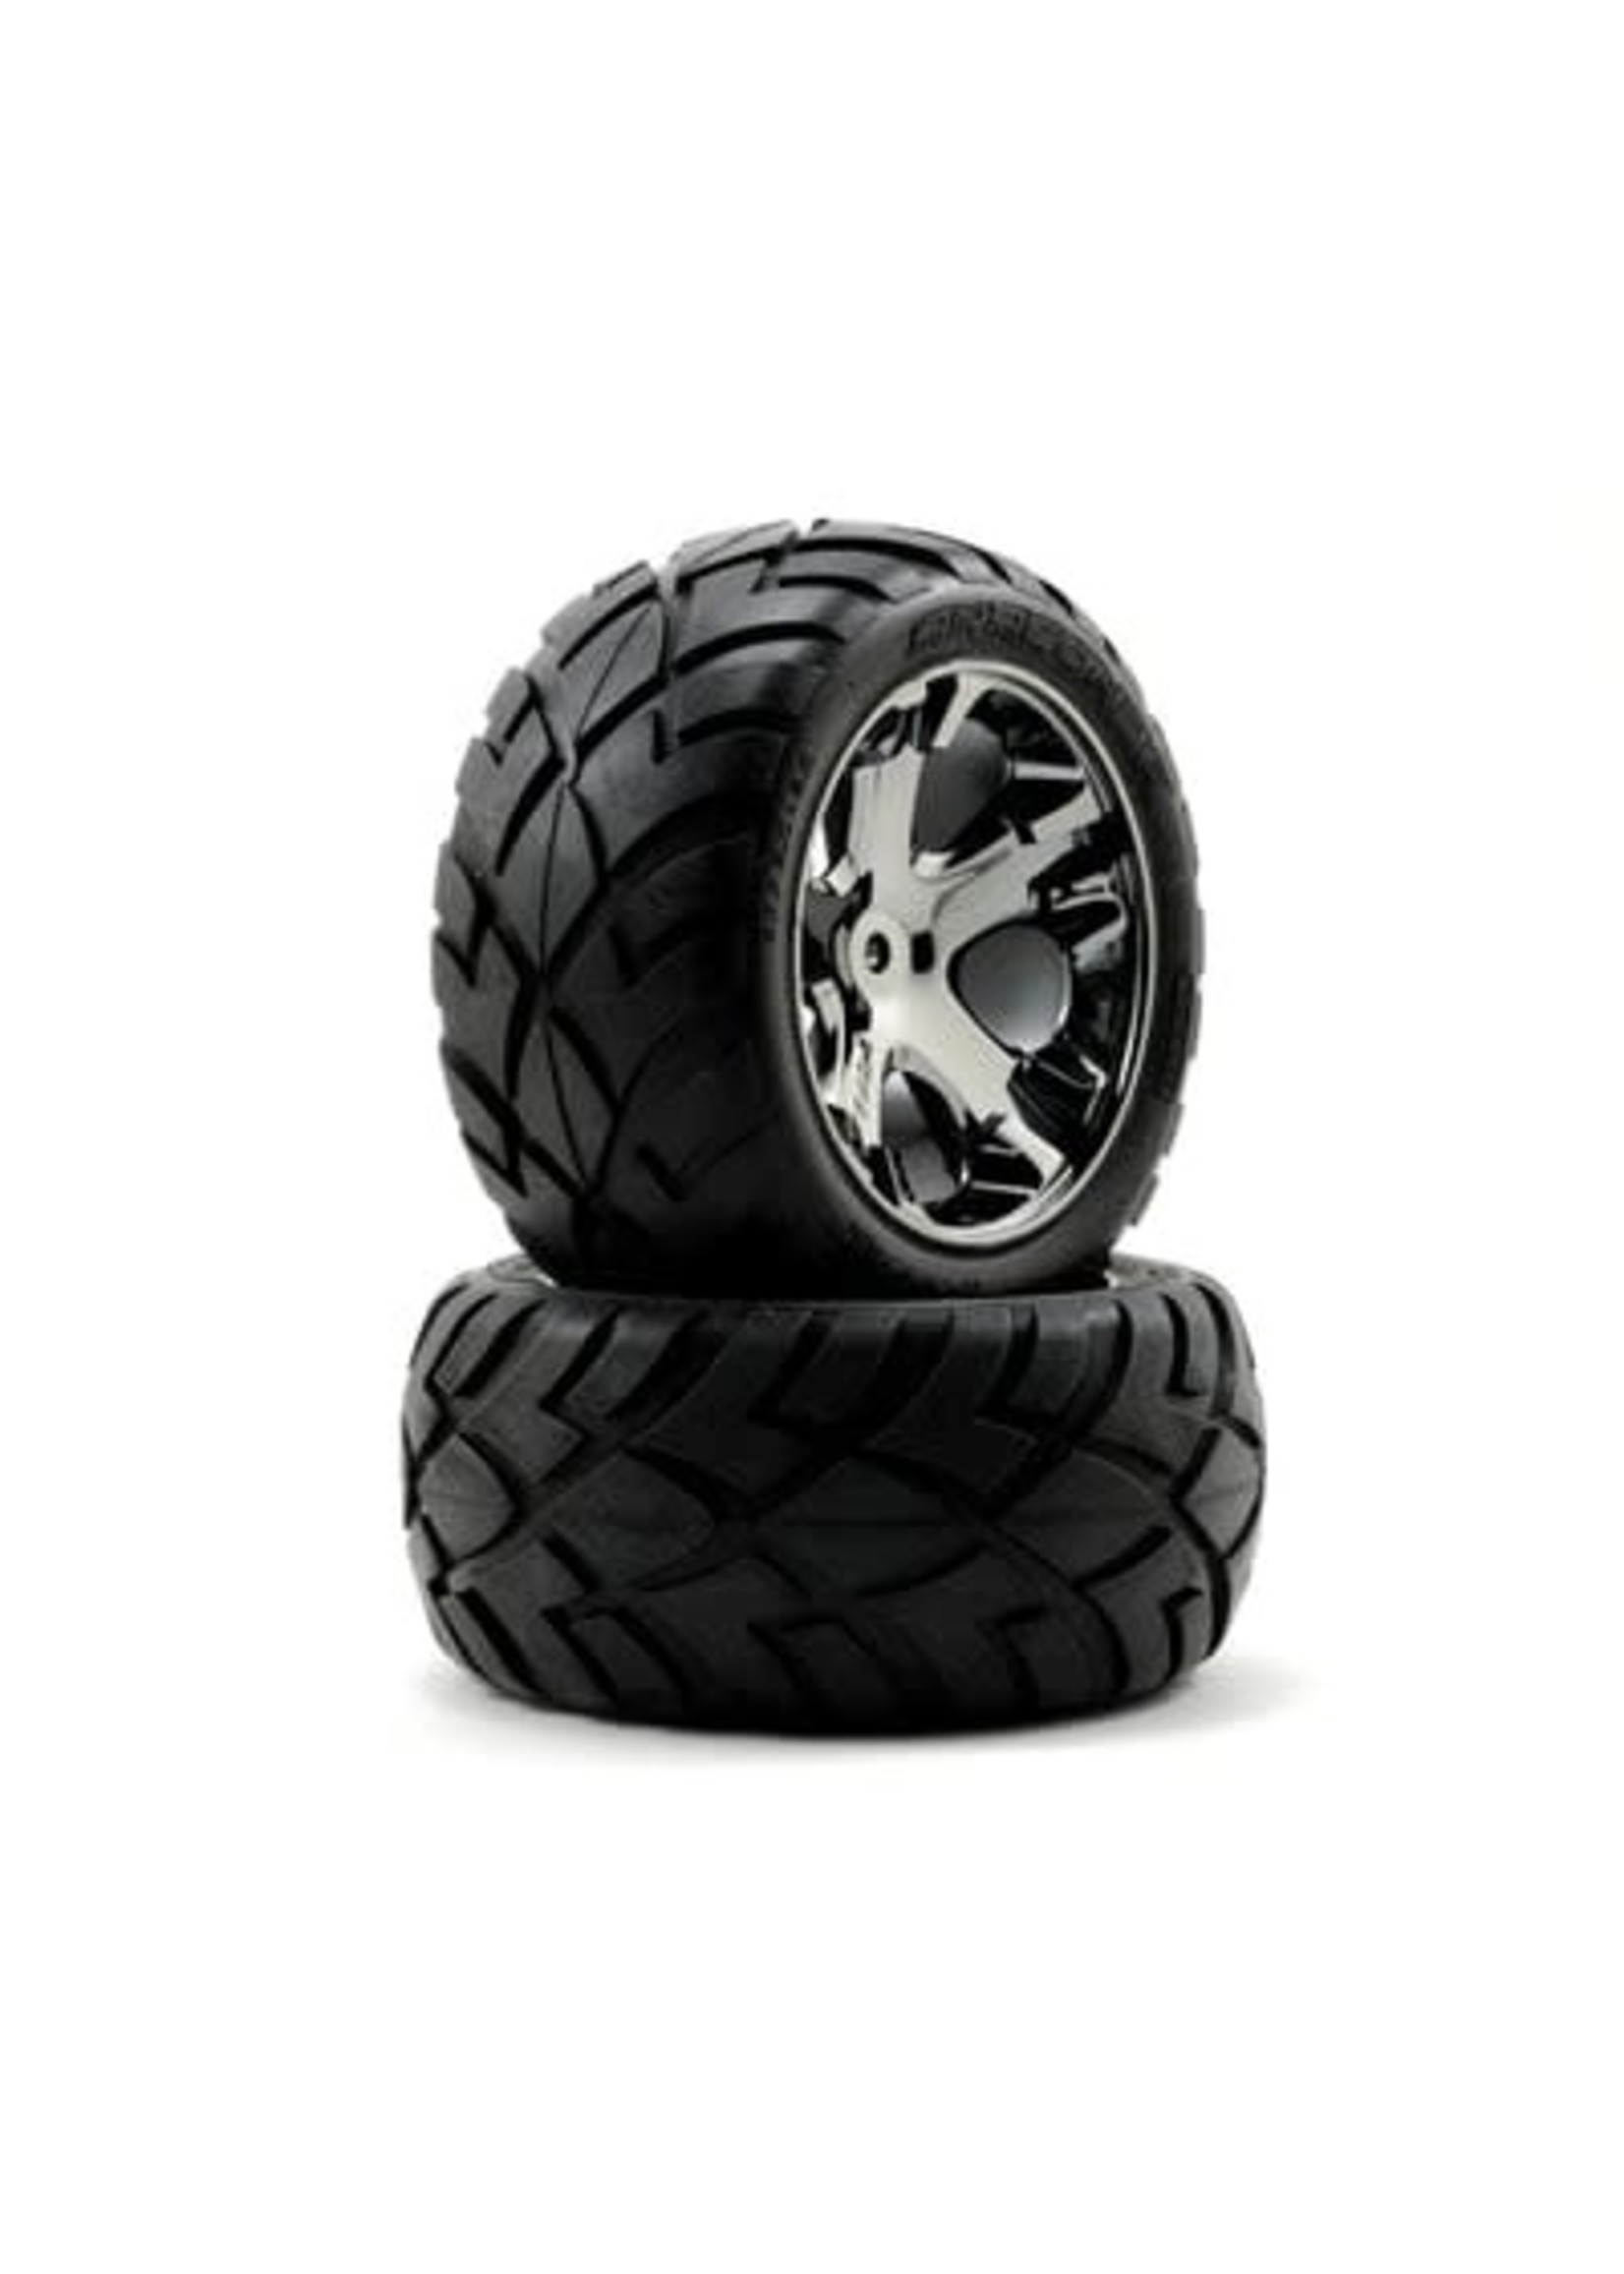 Traxxas 3773A Tires & wheels, assembled, glued (All Star black chrome wheels, Anaconda tires, foam inserts) (2WD electric rear) (1 left, 1 right)